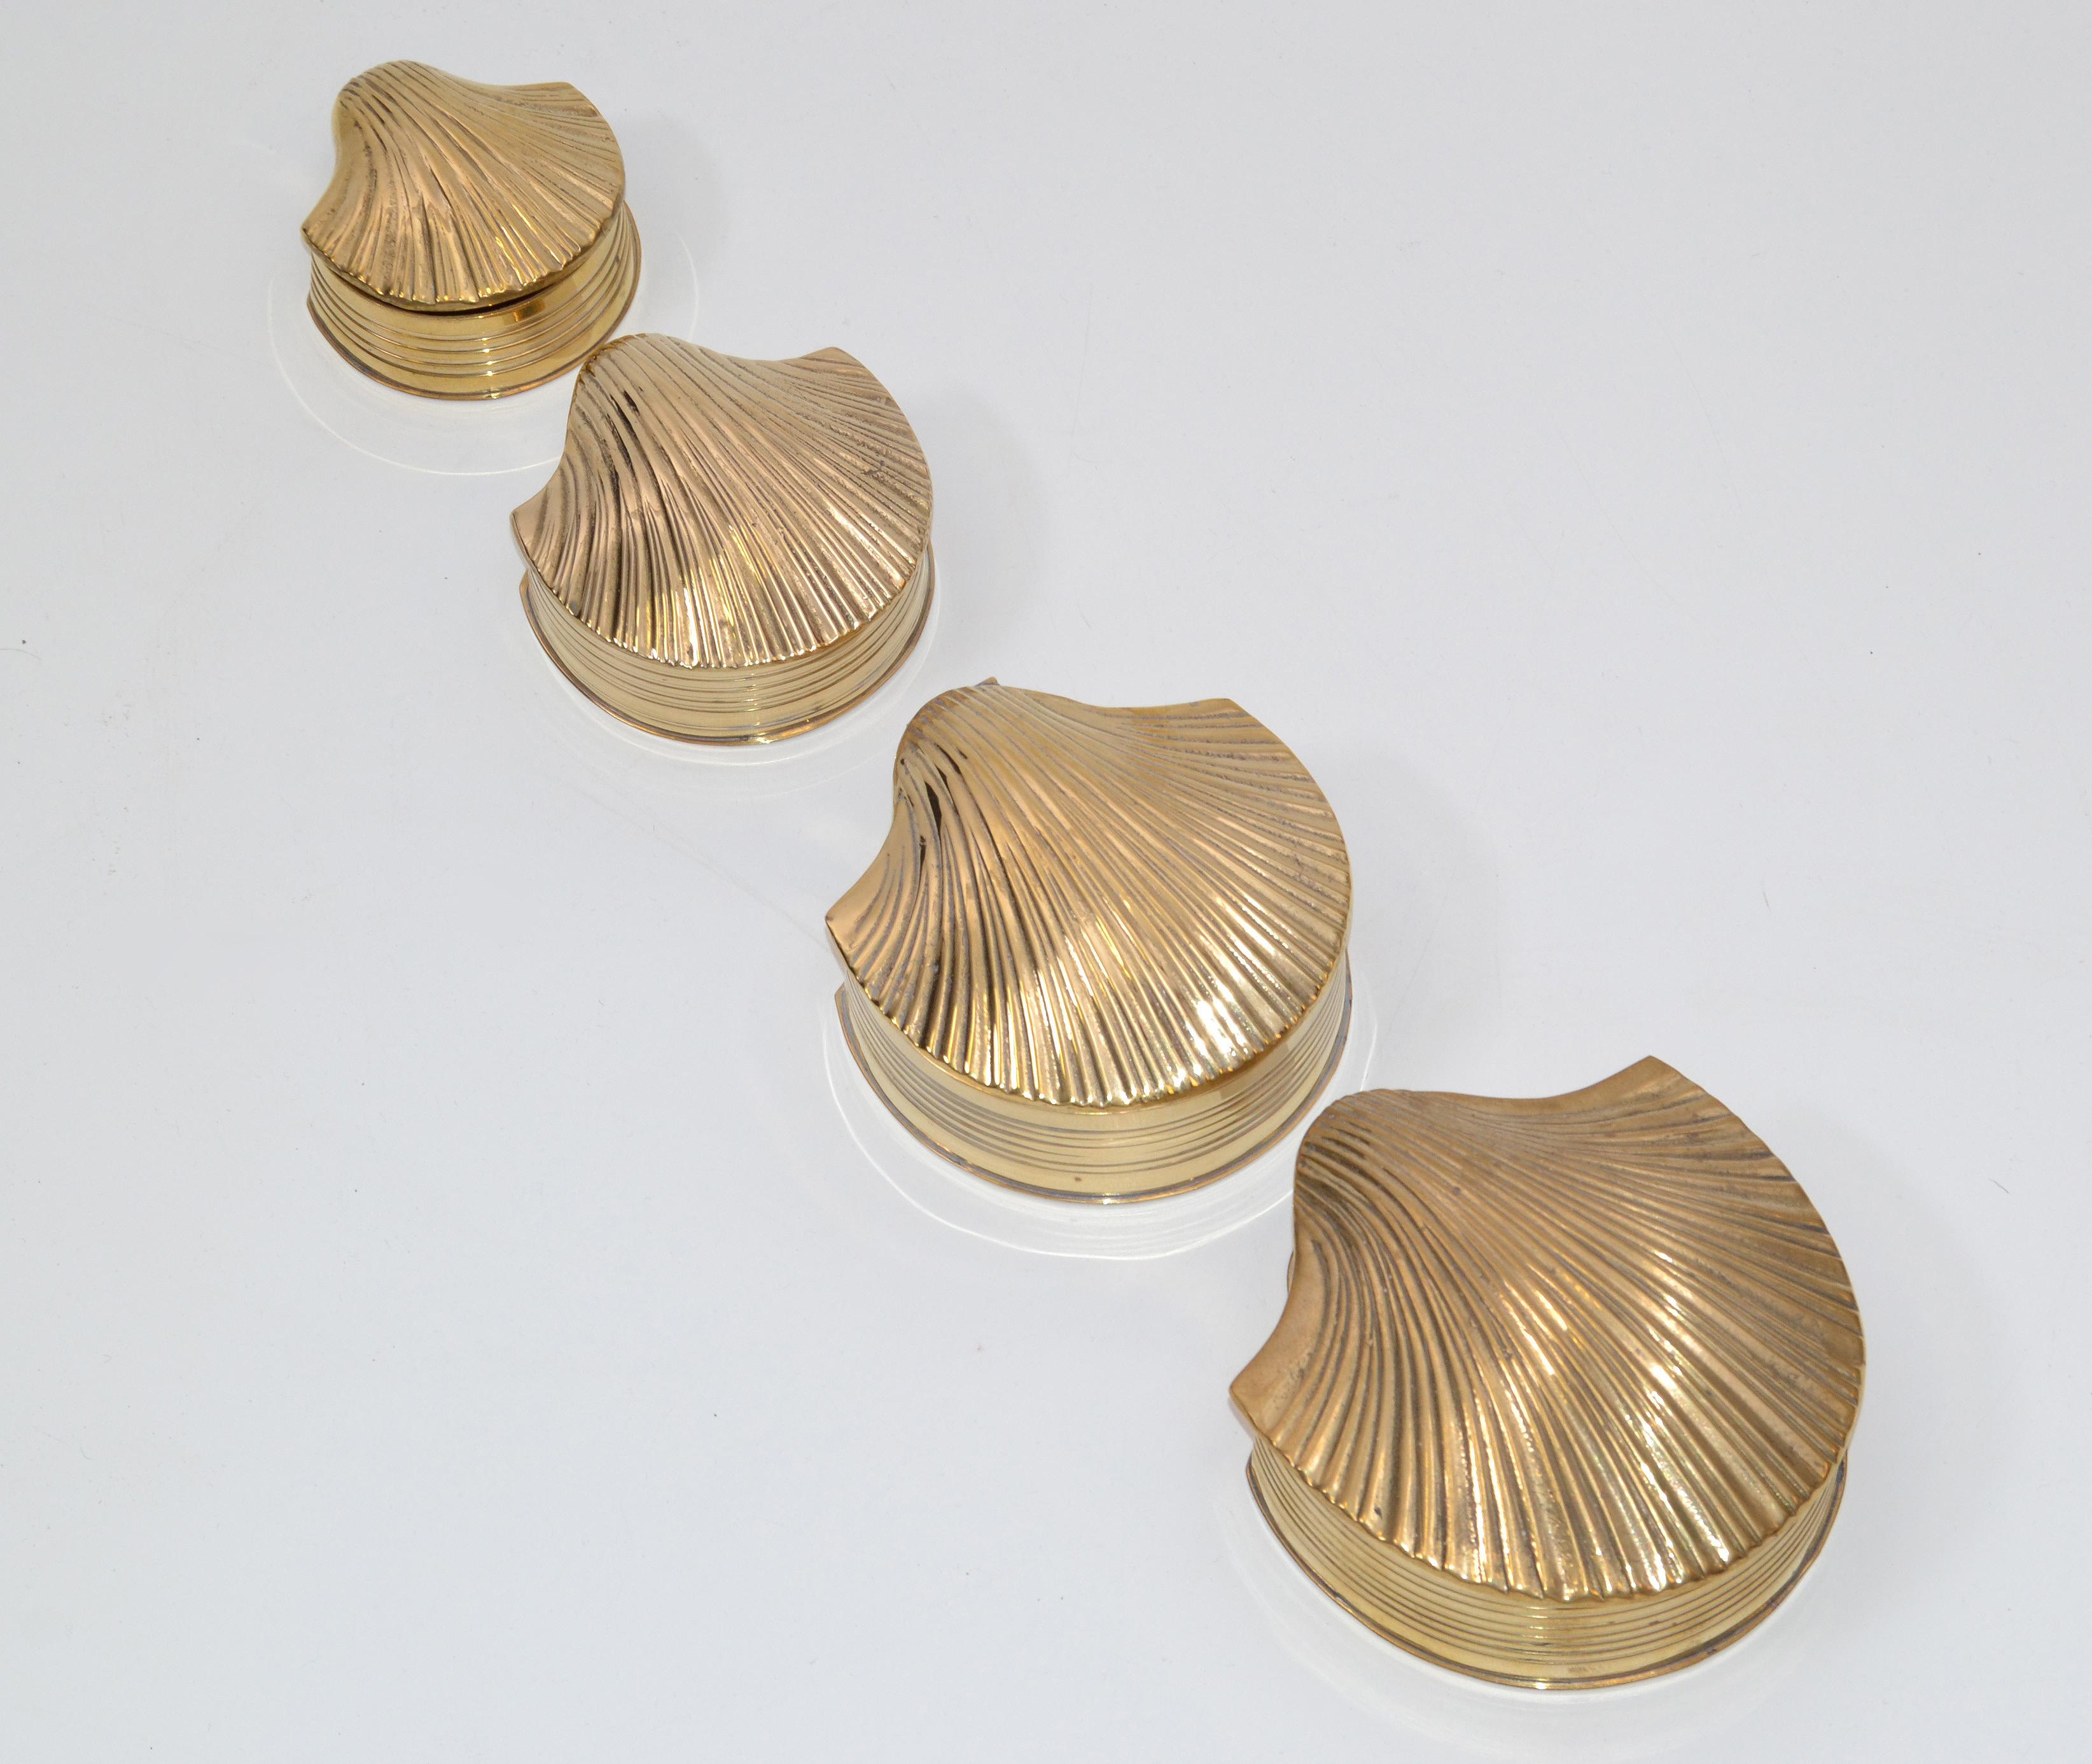 4 in 1 Nesting Vintage Brass Shell Scallop Shaped Trinket Boxes, Keepsakes 1970s 4